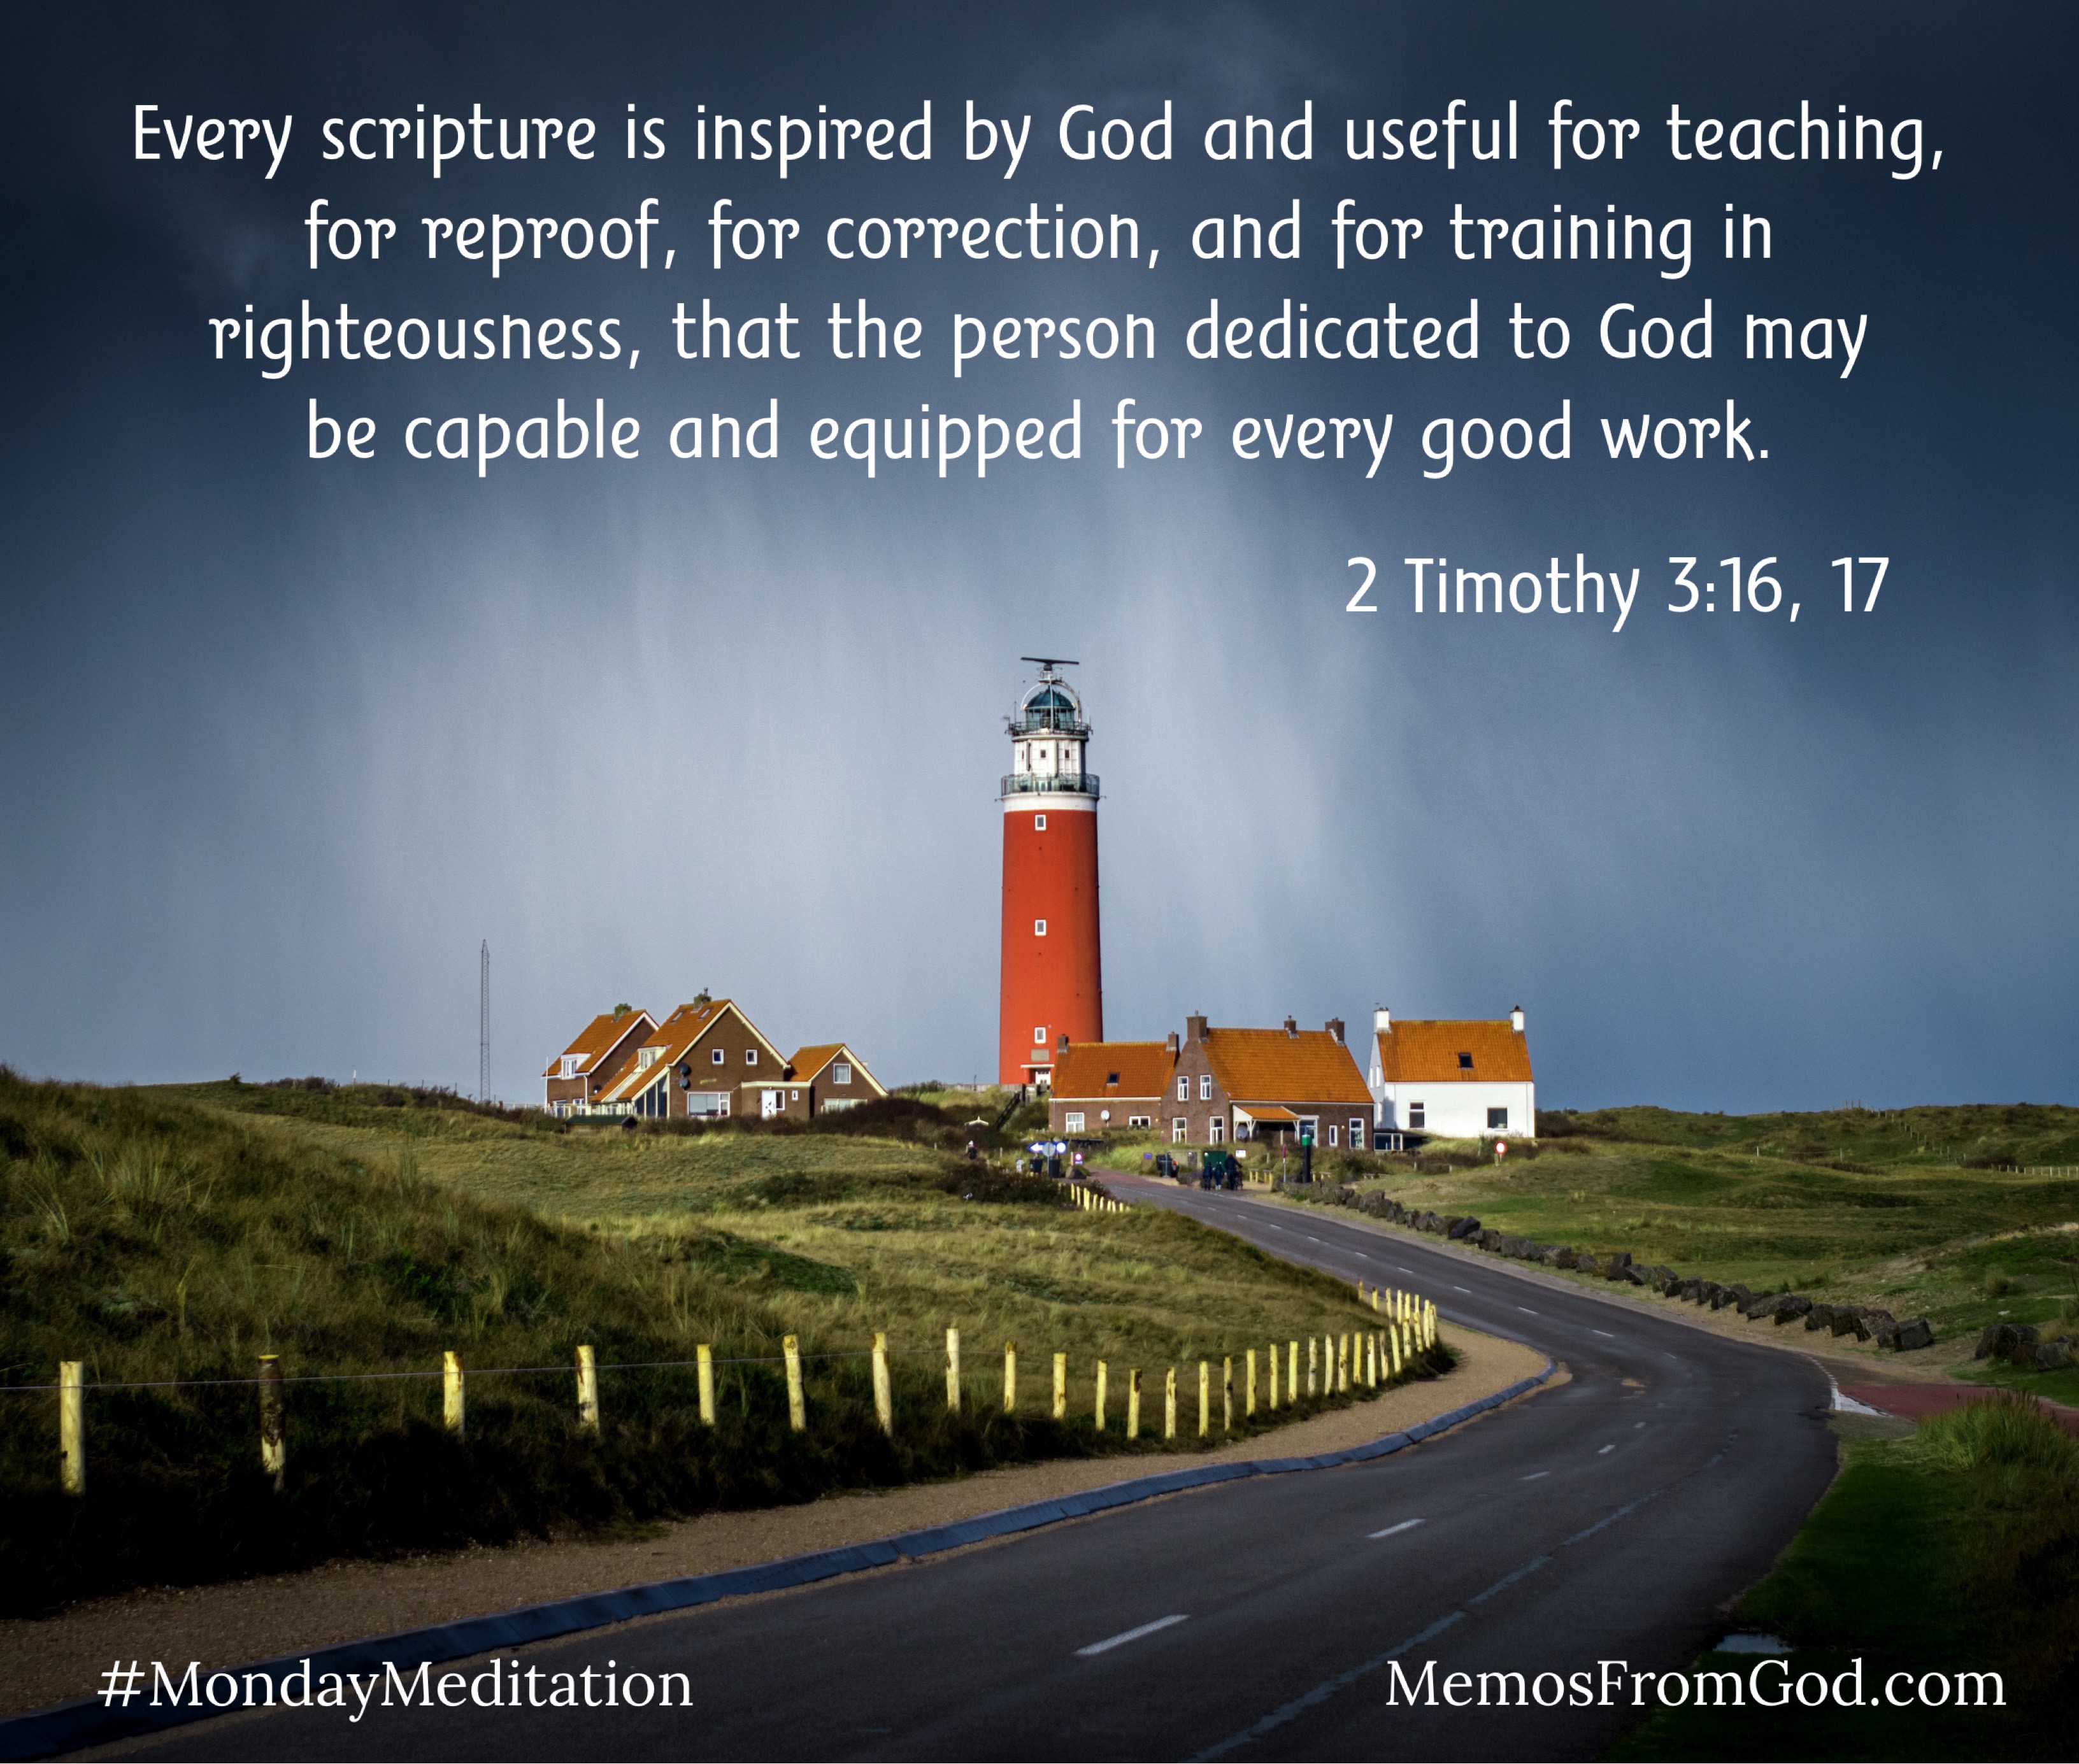 A road flanked by grassy fields leading to a rust-coloured lighthouse with houses near its base. All are bathed in a stormy light coming from a mostly dark sky. Caption: Every scripture is inspired by God and useful for teaching, for reproof, for correction, and for training in righteousness, that the person dedicated to God may be capable and equipped for every good work. 2 Timothy 3:16, 17